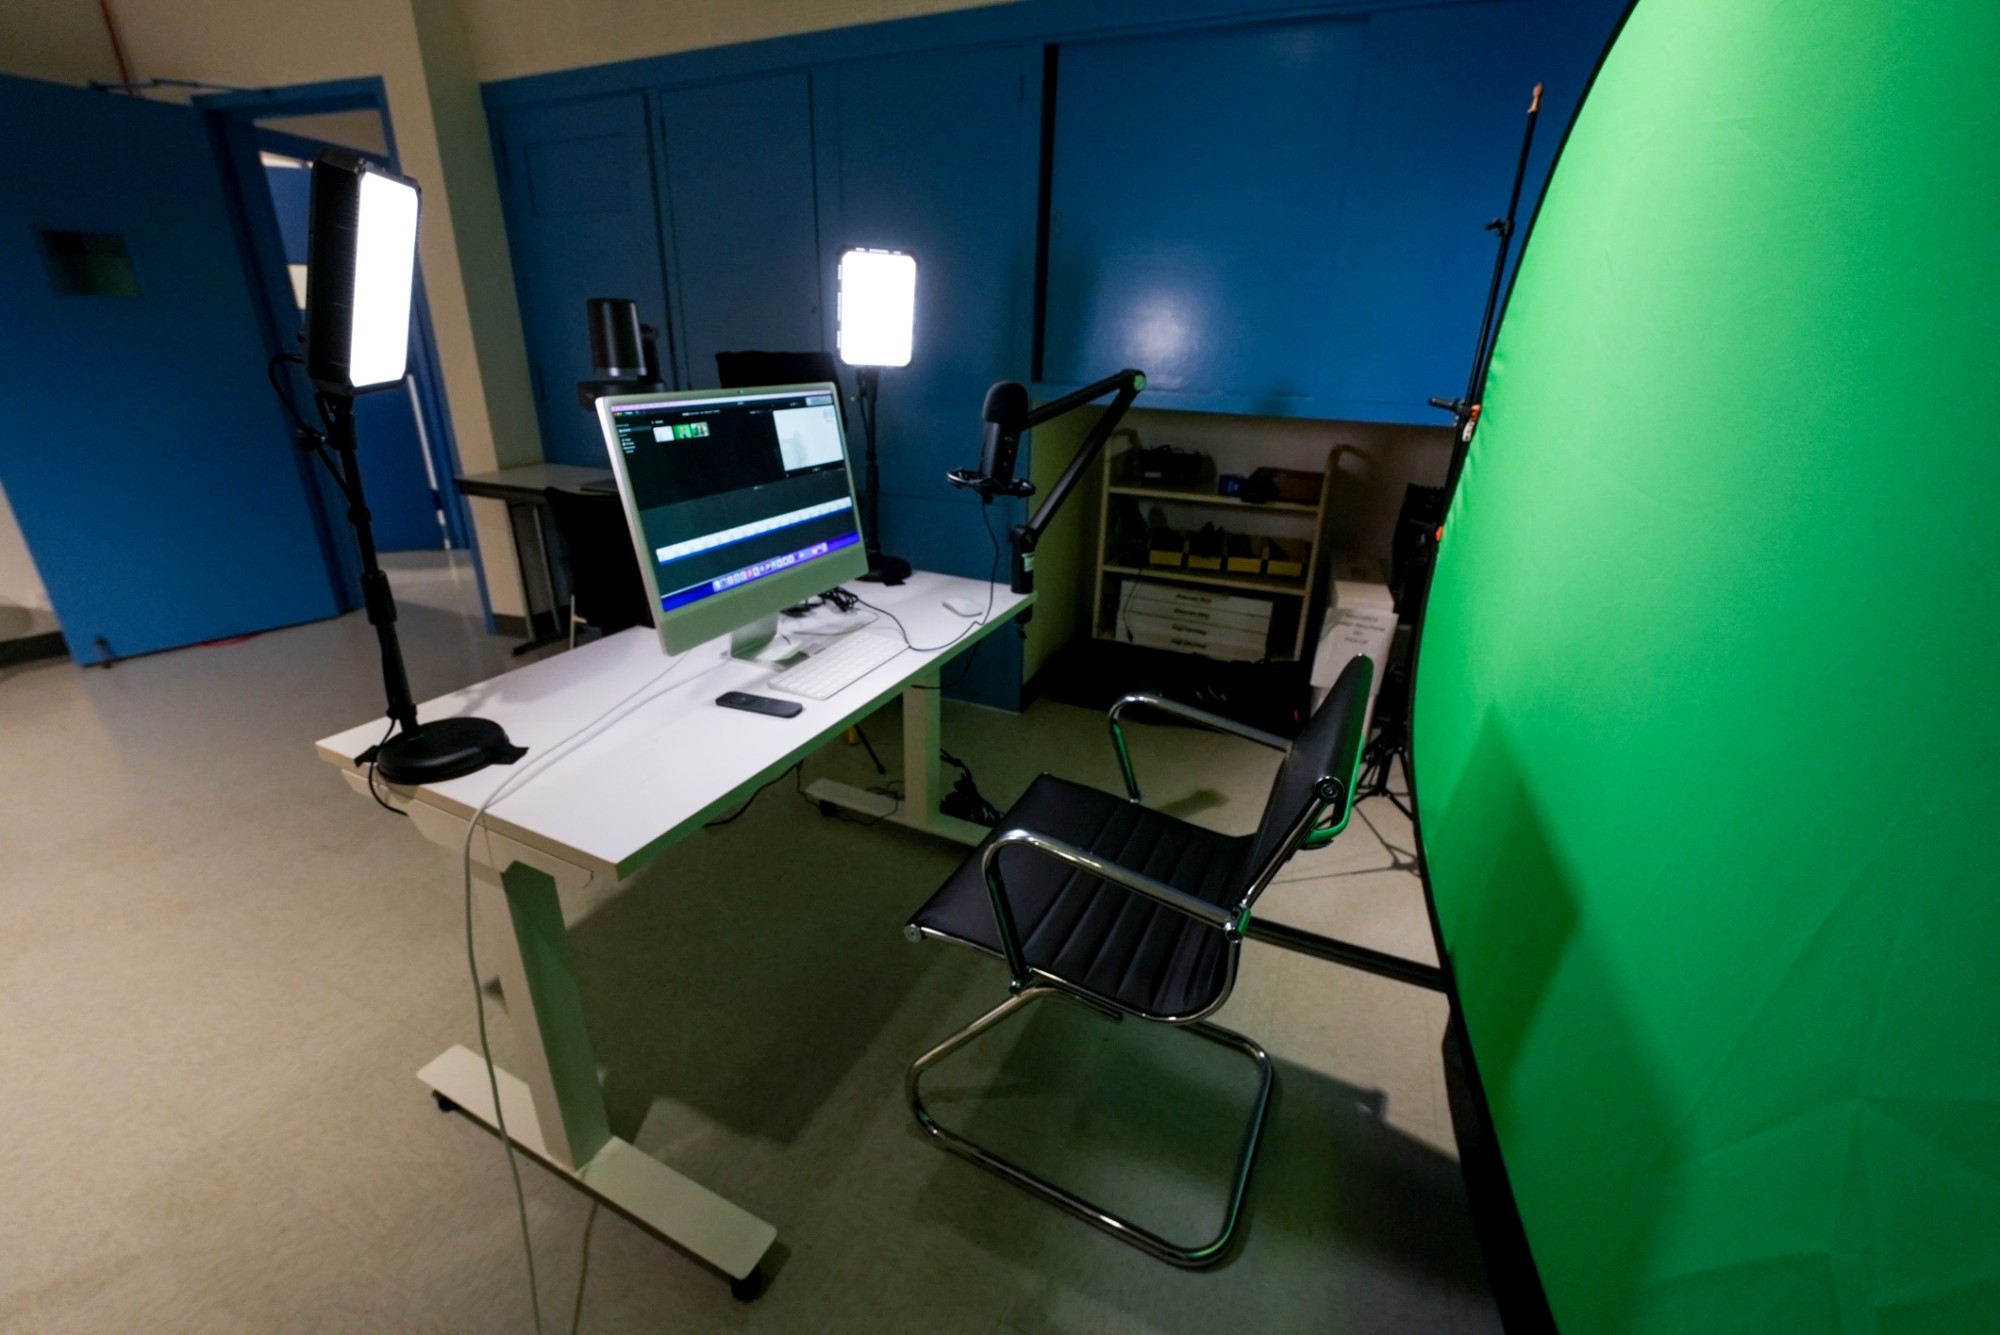 Studio B self service recording station iMac with lights microphone and greenscreen